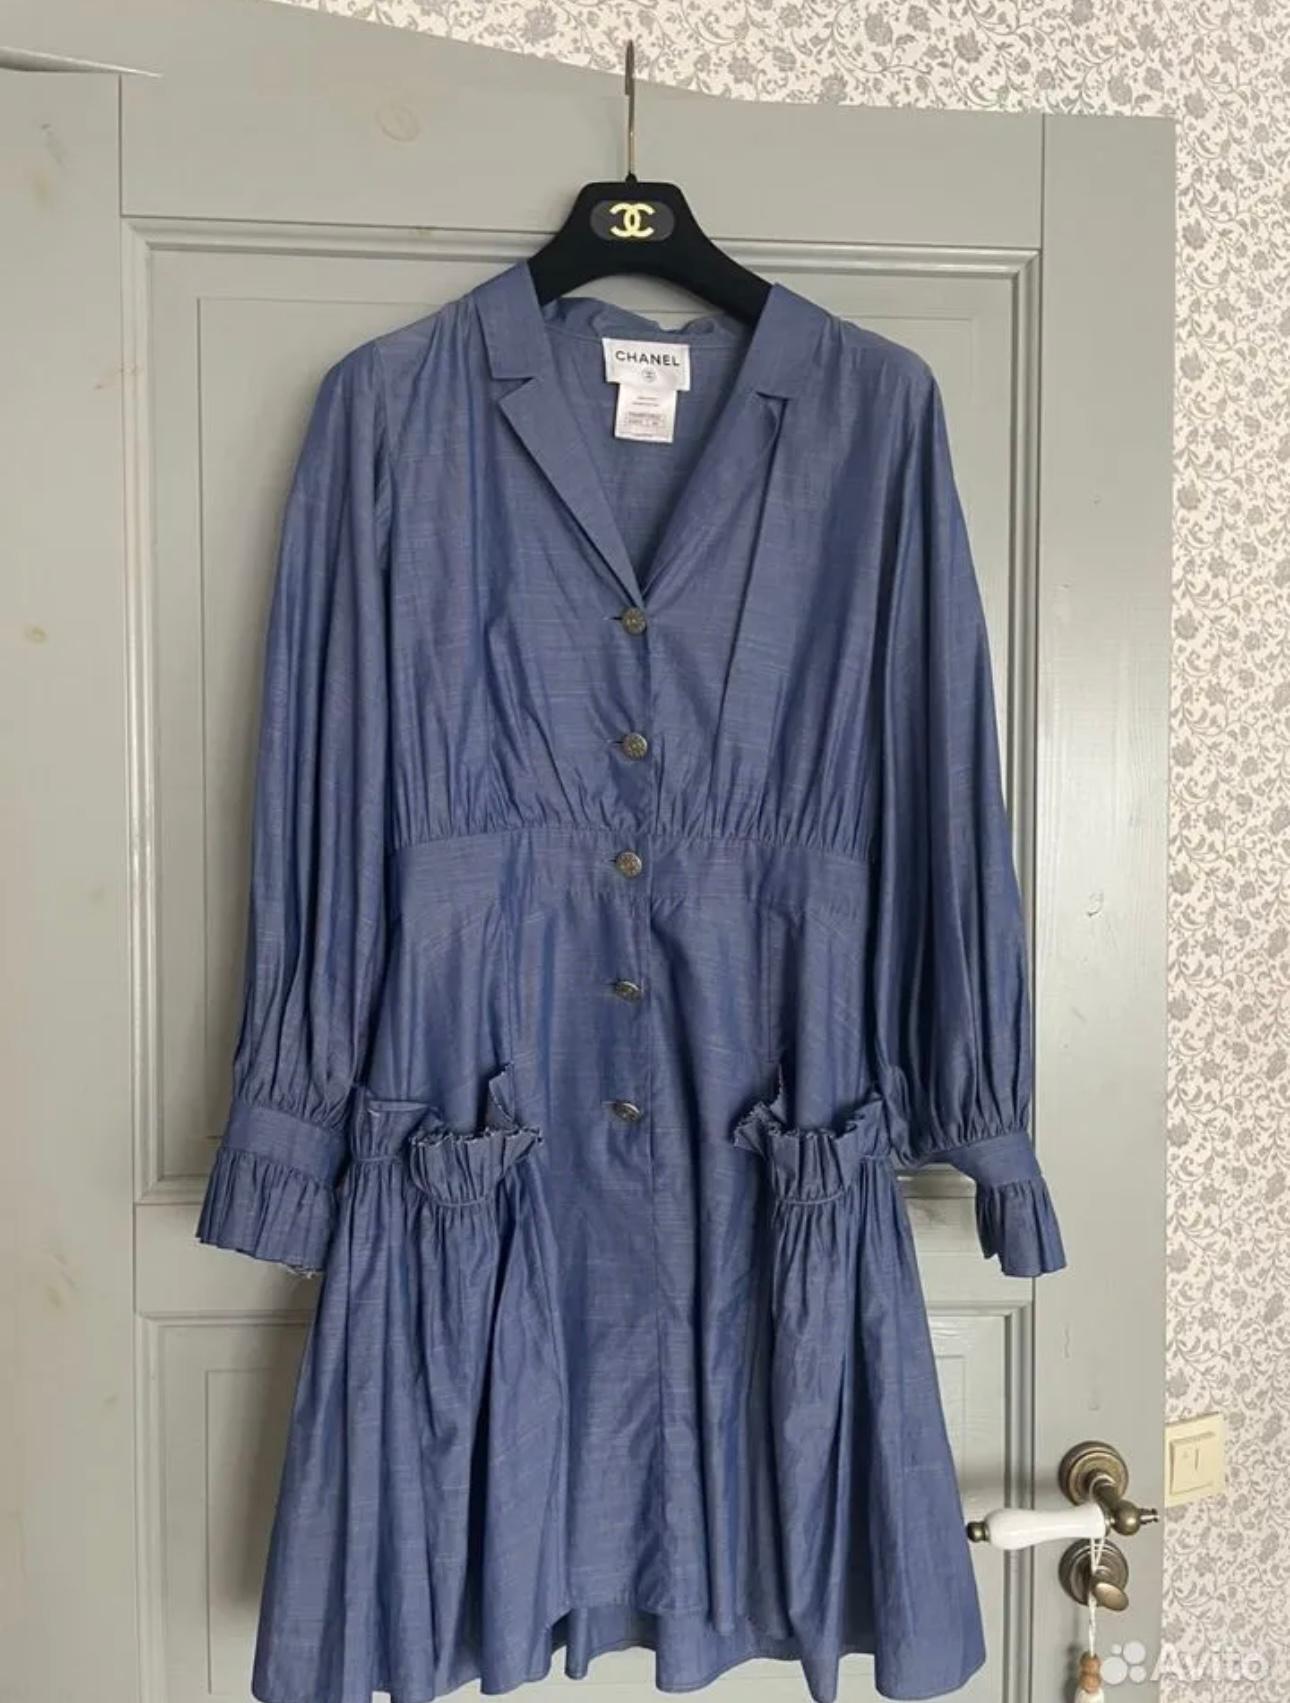 Charming Chanel blue ruffled dress from Paris / SINGAPORE Cruise Collection
- CC logo buttons
Size mark 40 FR. Condition is pristine.